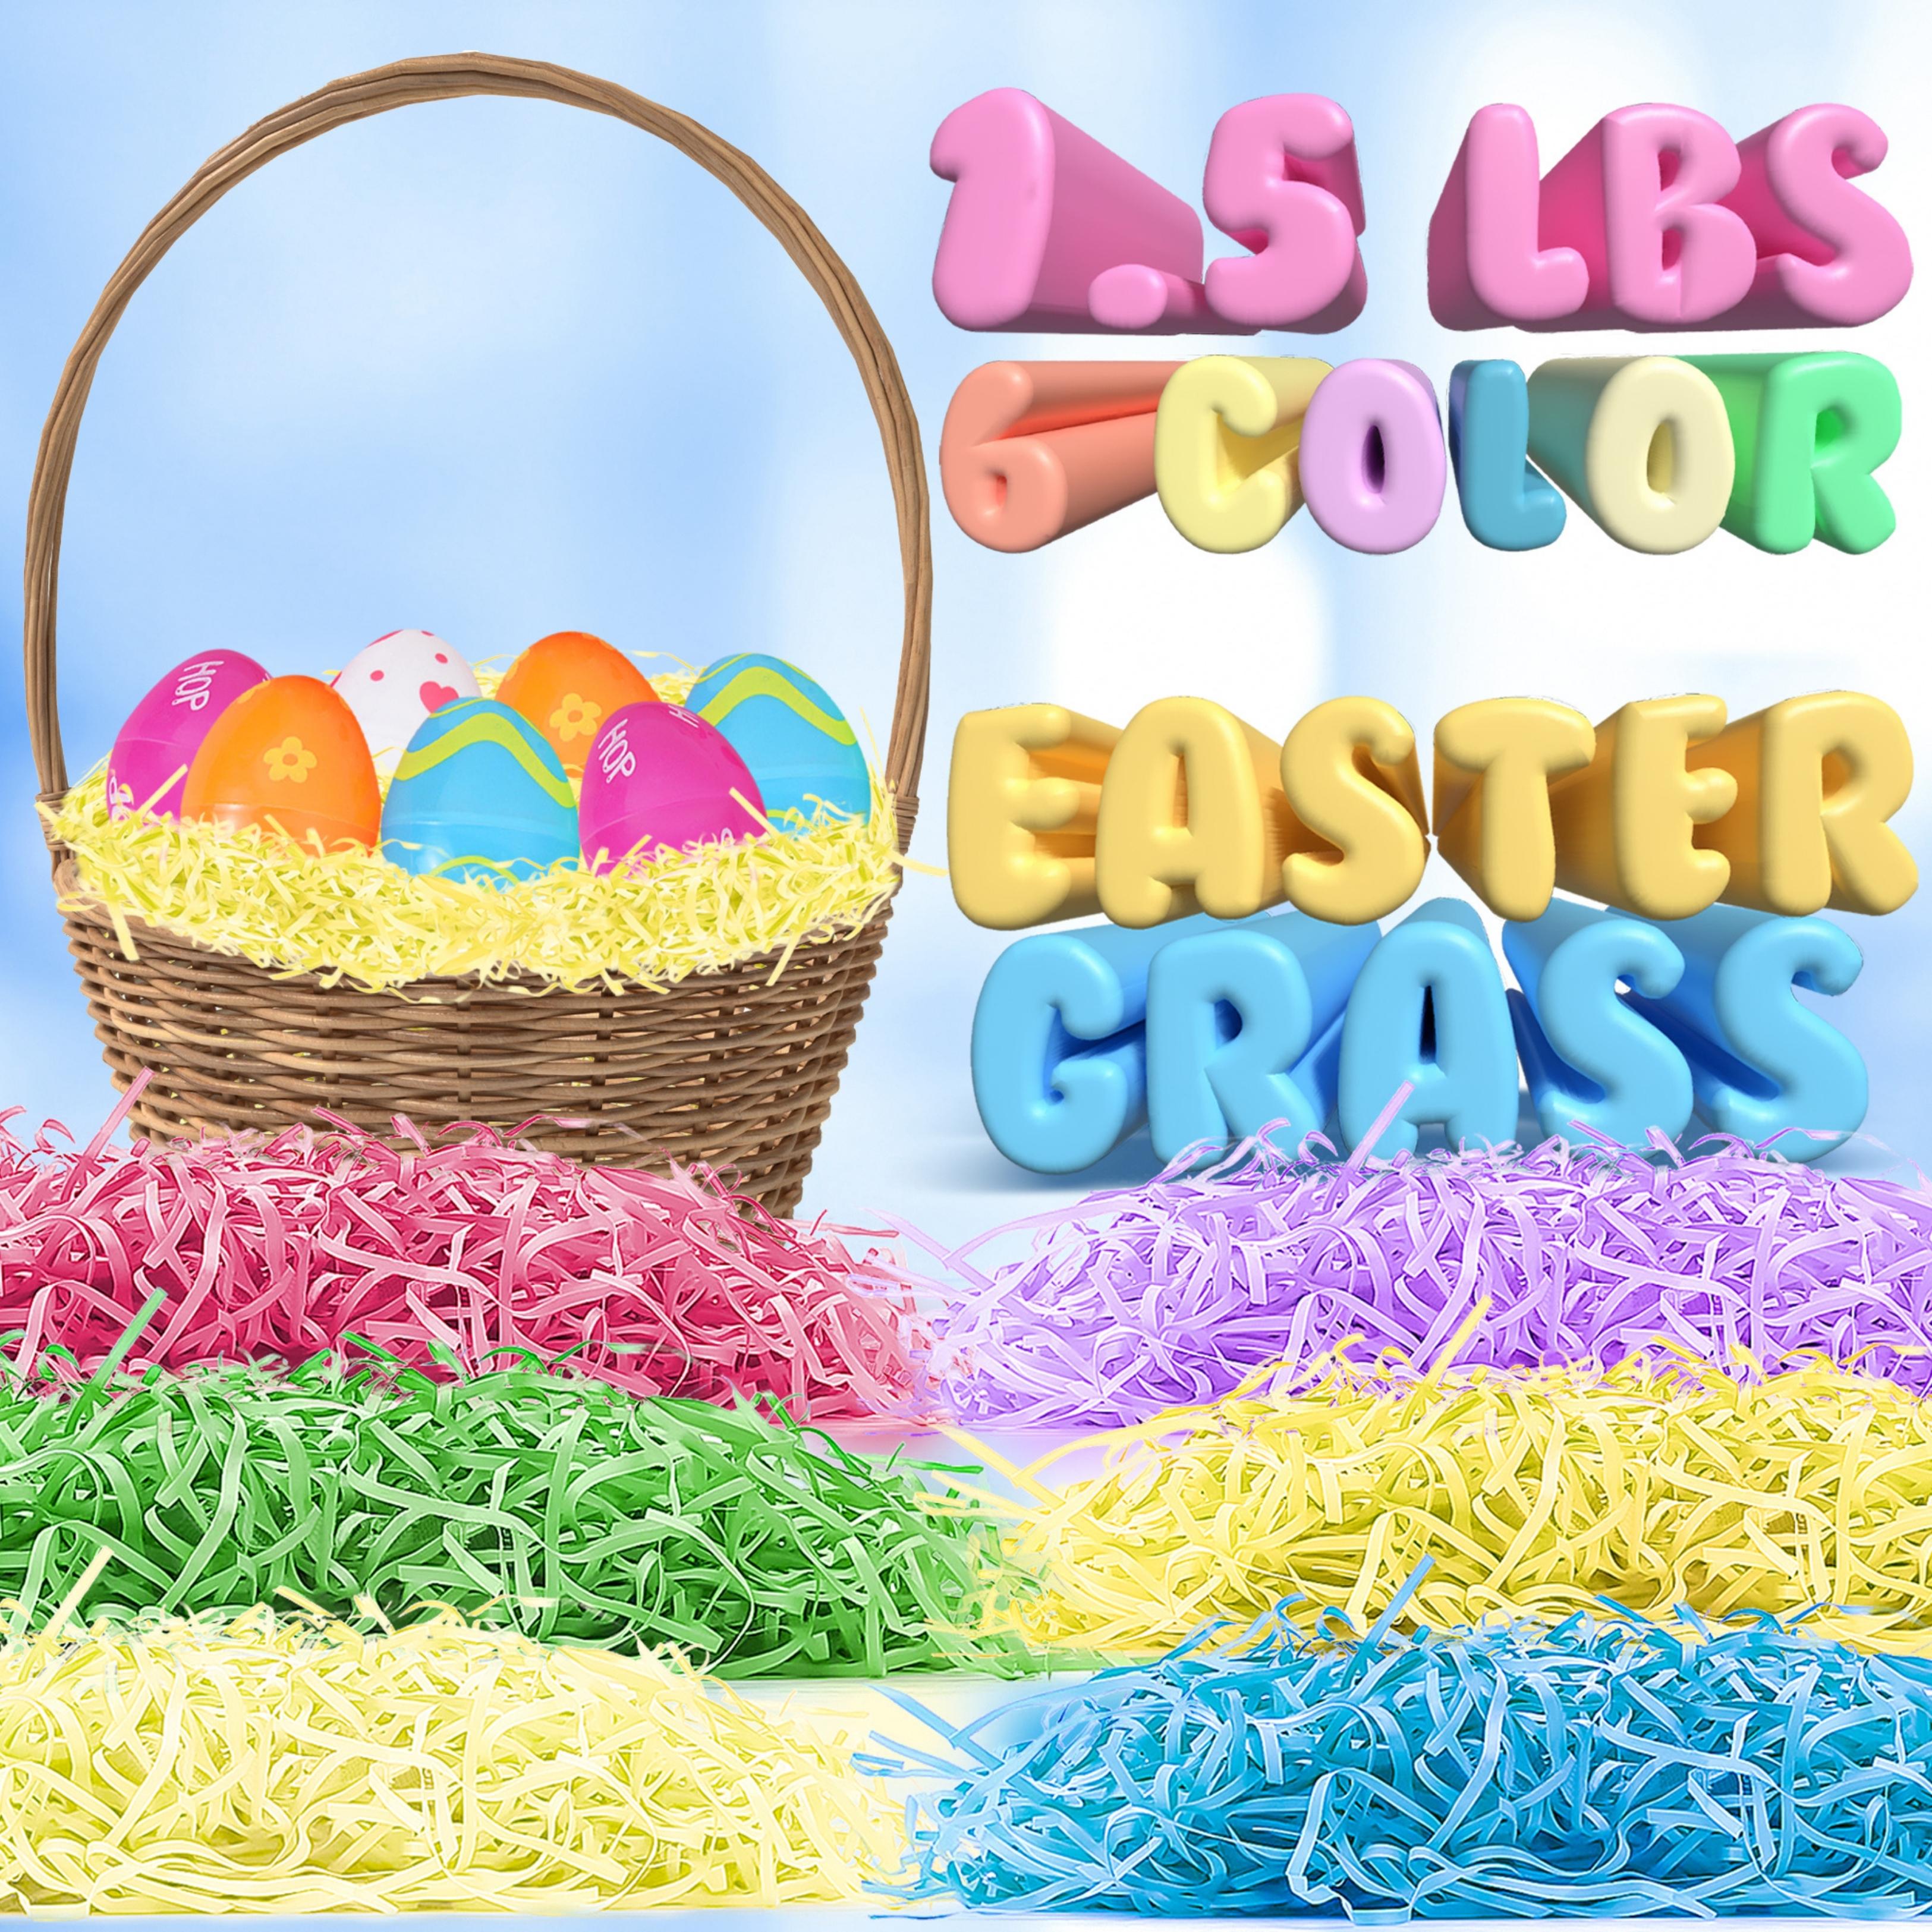 Joyx Easter Grass 24oz (680g) 6 Colors Easter Basket Filler Stuffers, Recyclable Shred Paper Grass for Easter Egg Hunt Dcor, Party Favors, Classroom